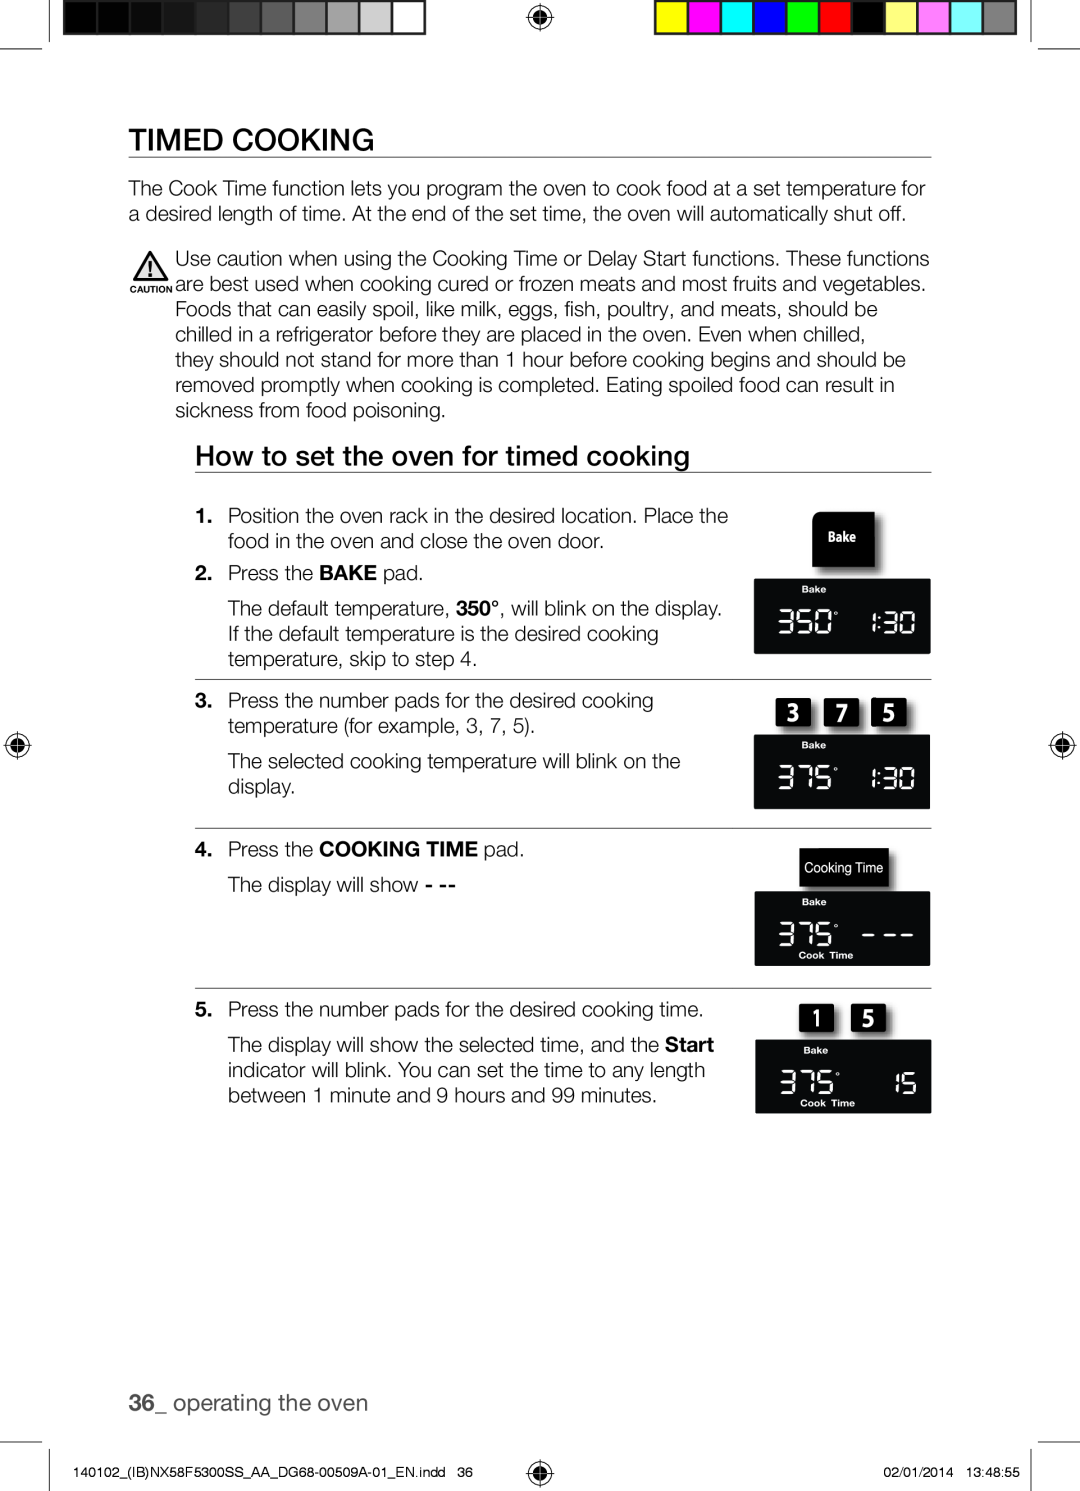 Samsung NX58F5500SW user manual Timed Cooking, How to set the oven for timed cooking, operating the oven 